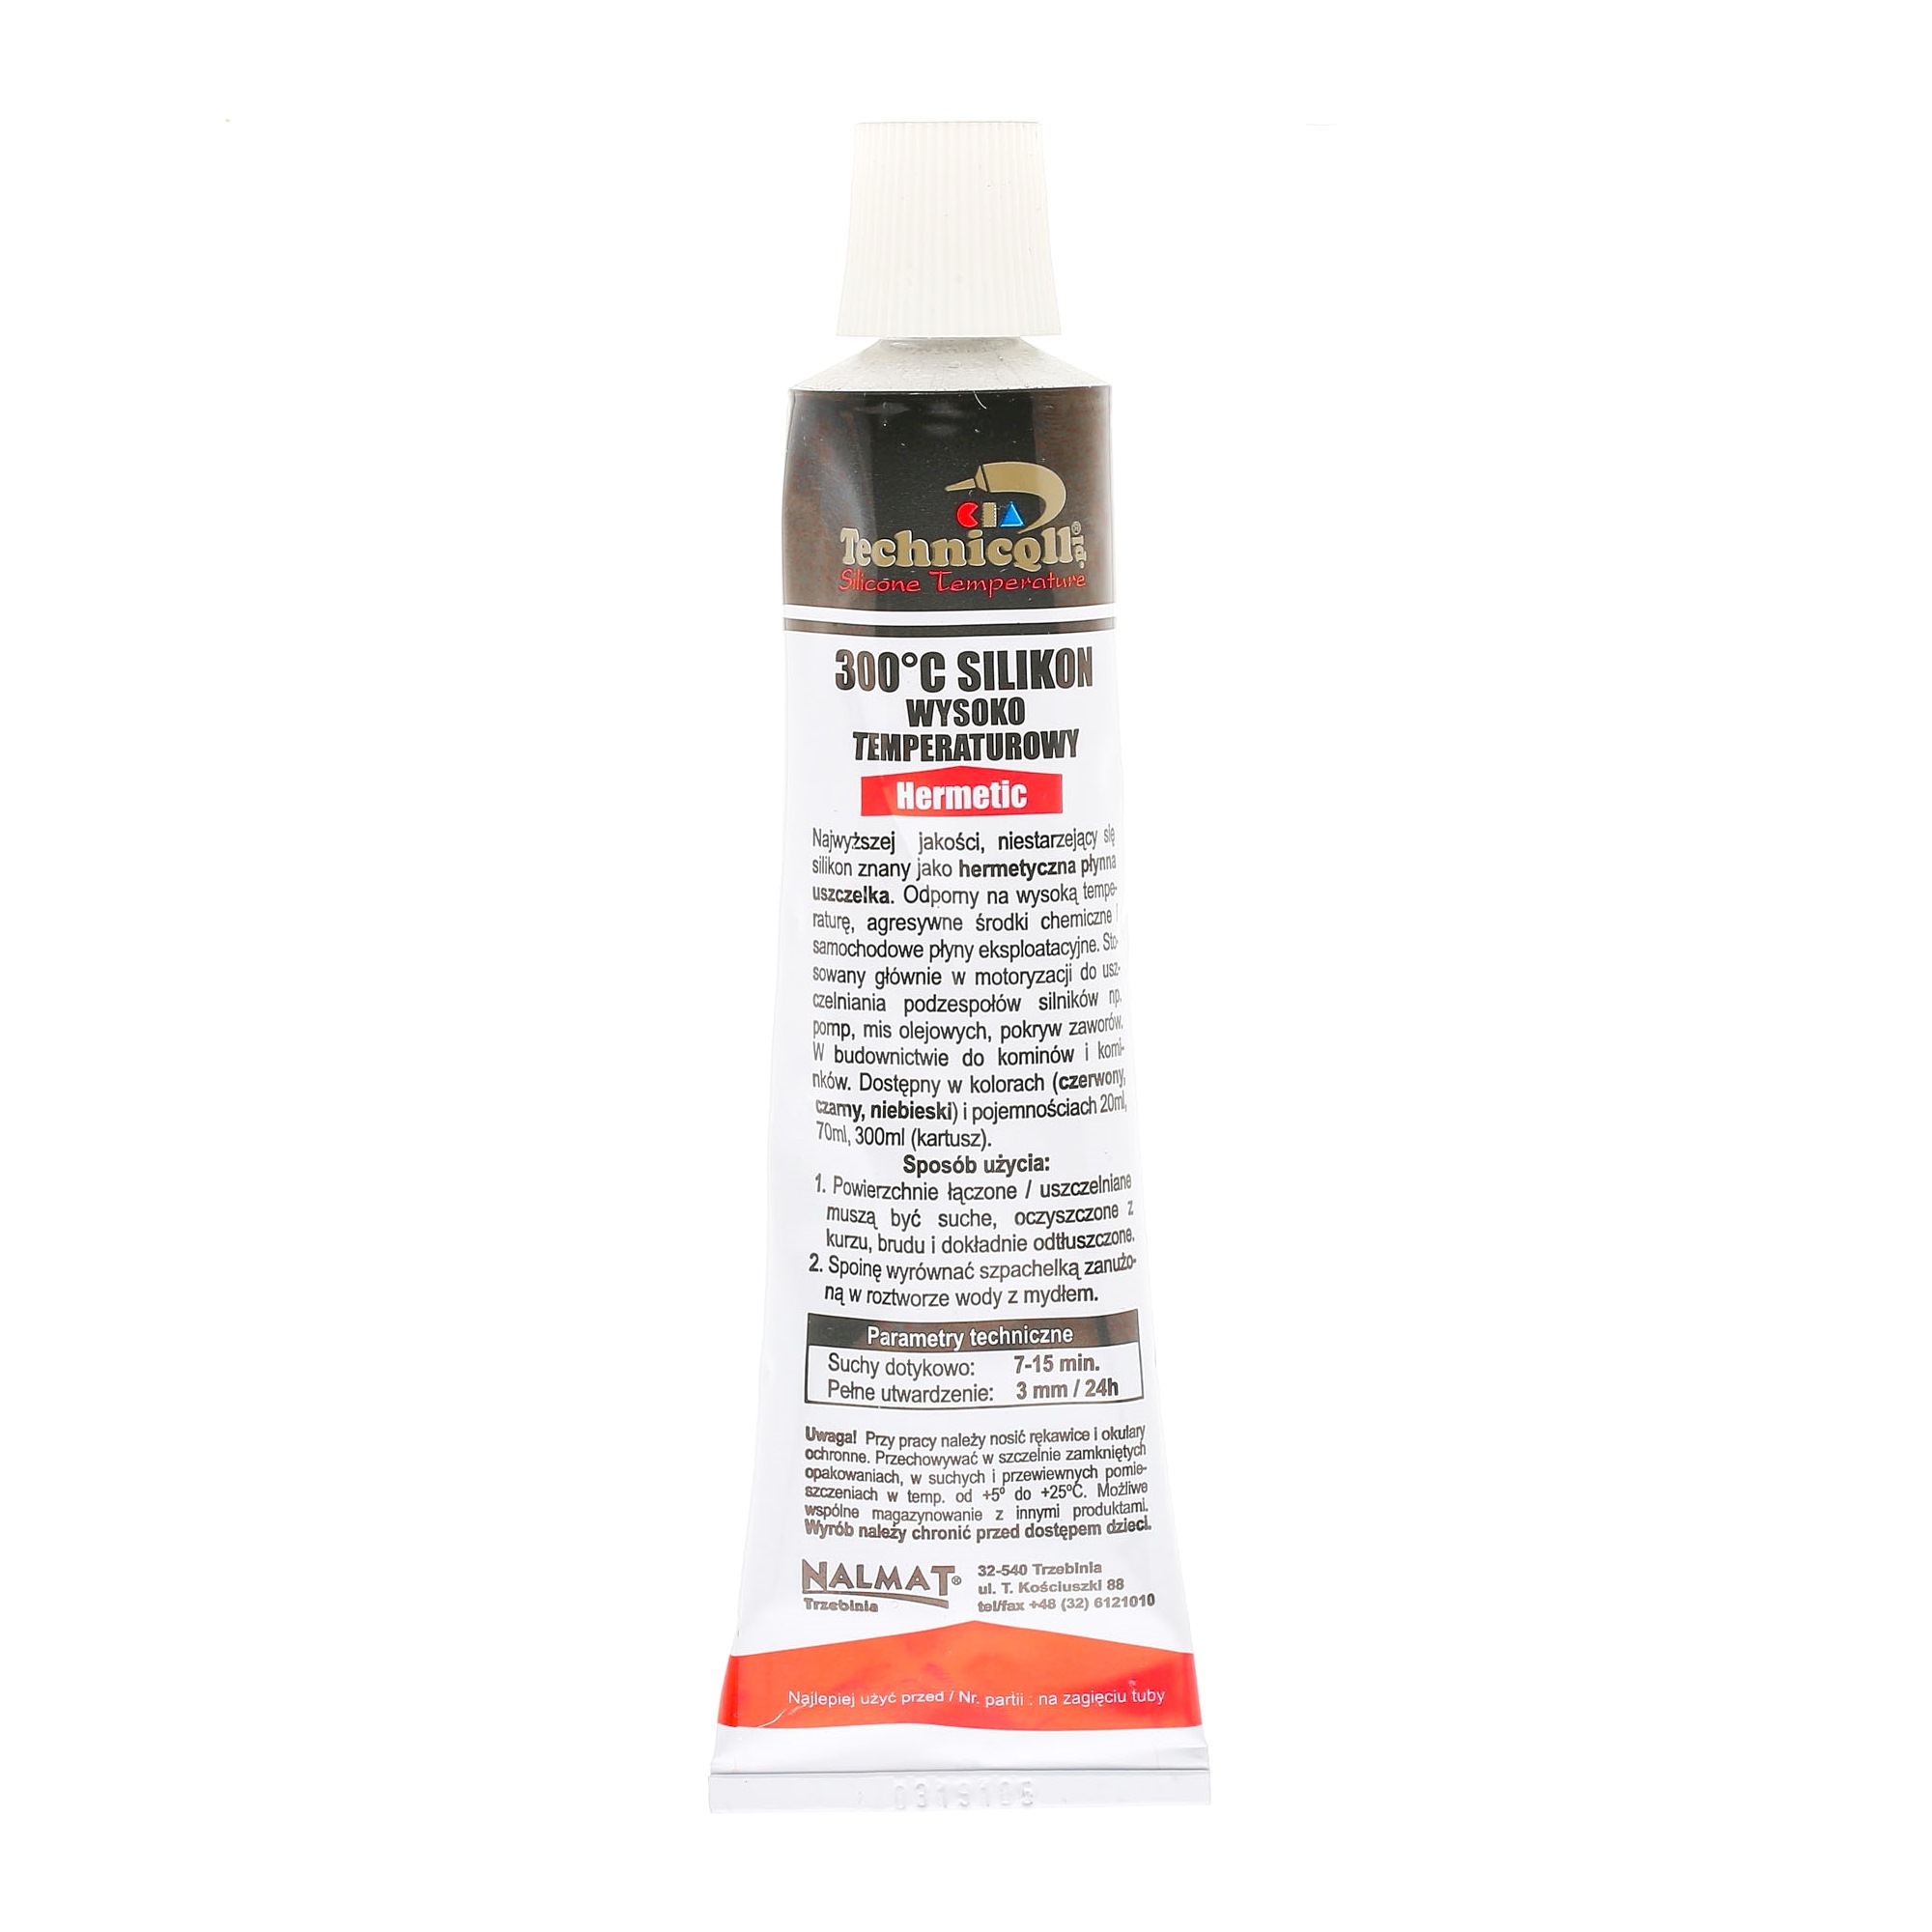 TECHNICQLL S280 Car body seam sealer Capacity: 70ml, Contains silicate, Heat-resistant, red